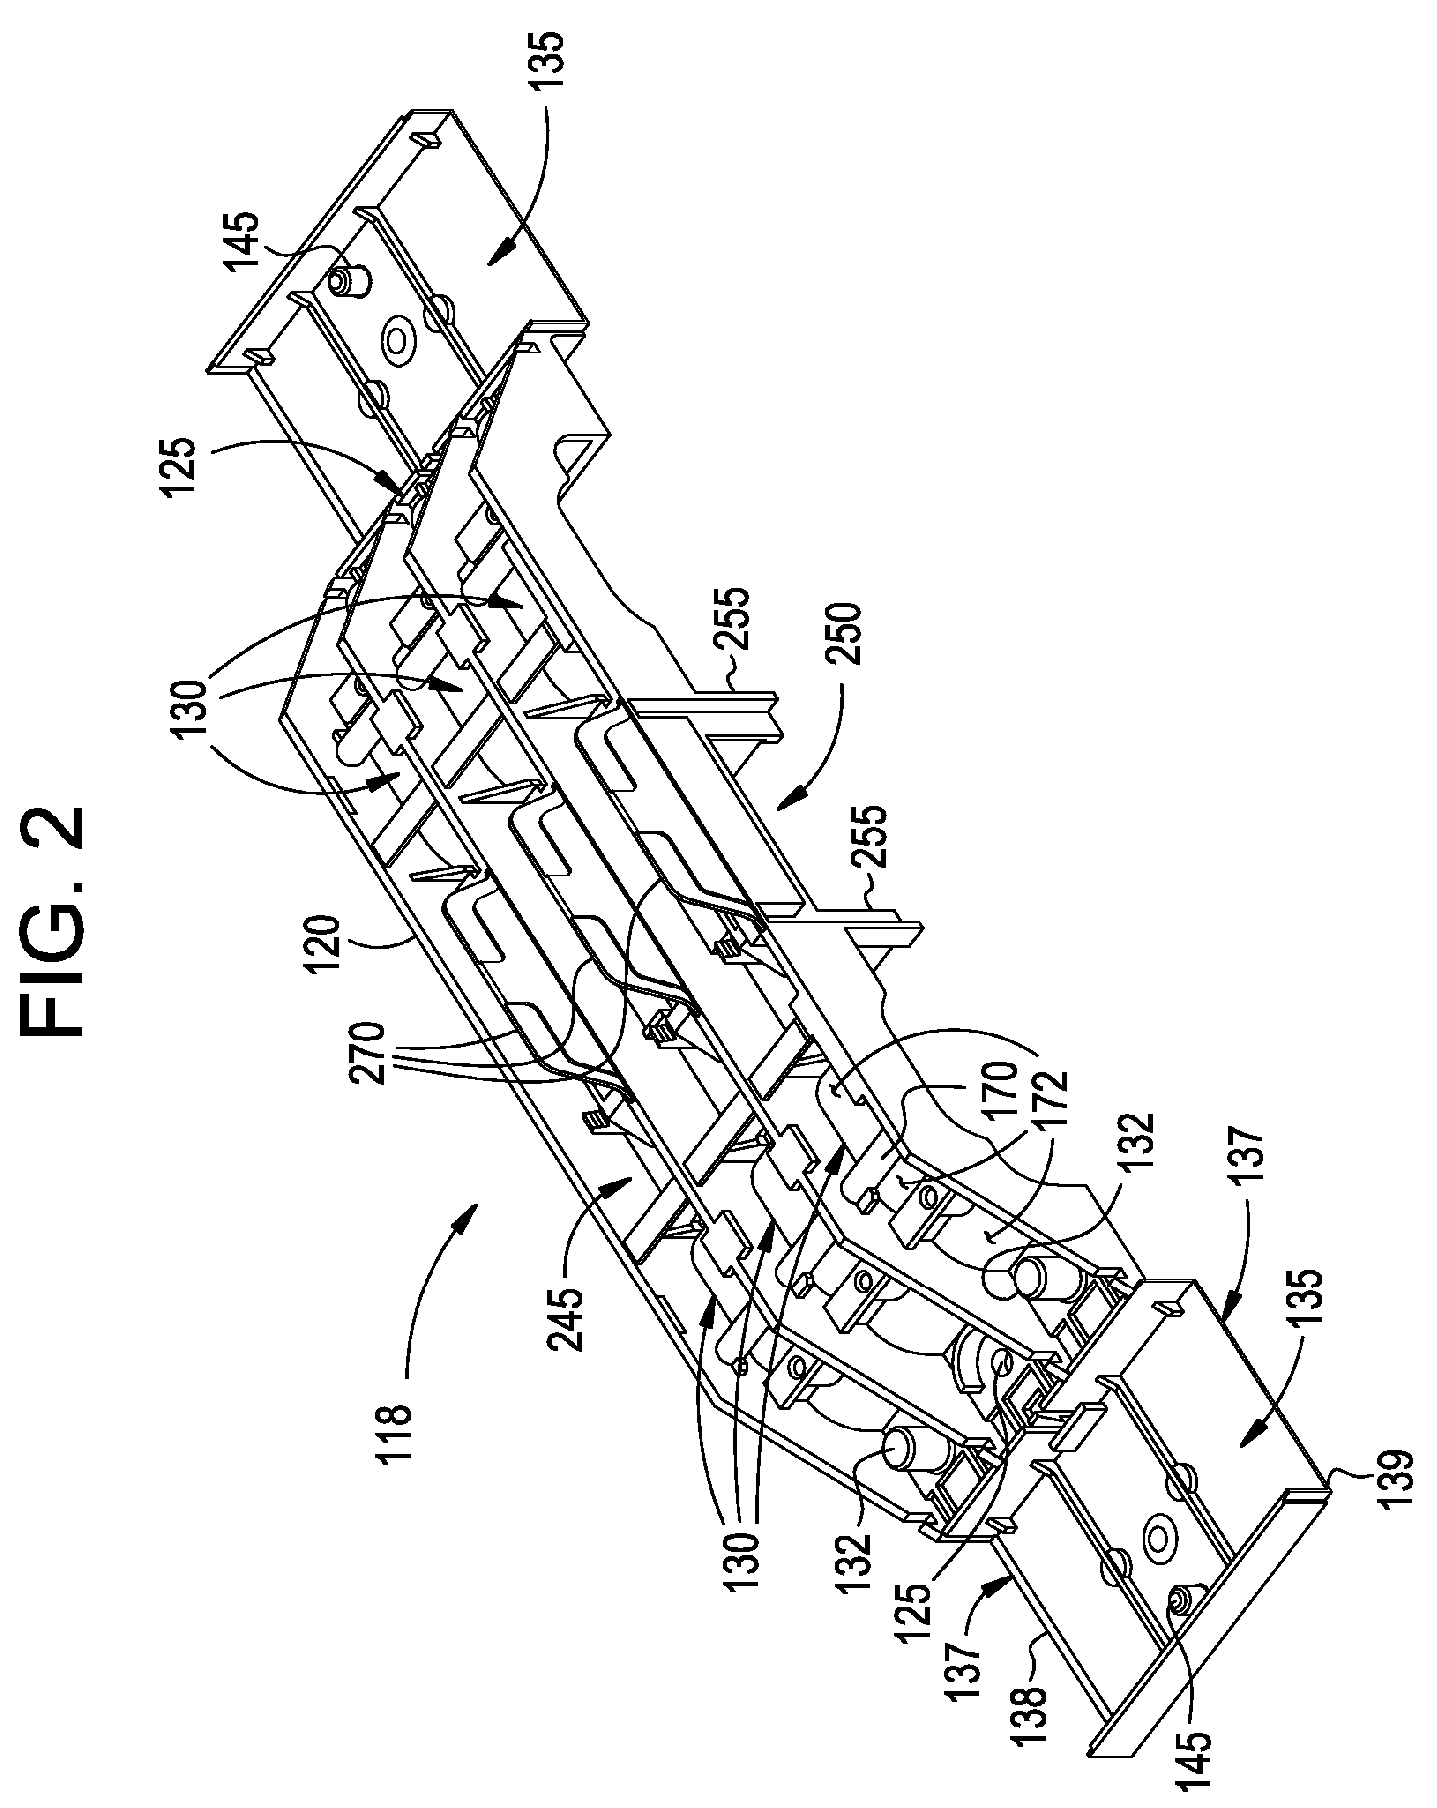 Apparatus for interfacing remote operated and non-remote operated circuit breakers with an electrical panel